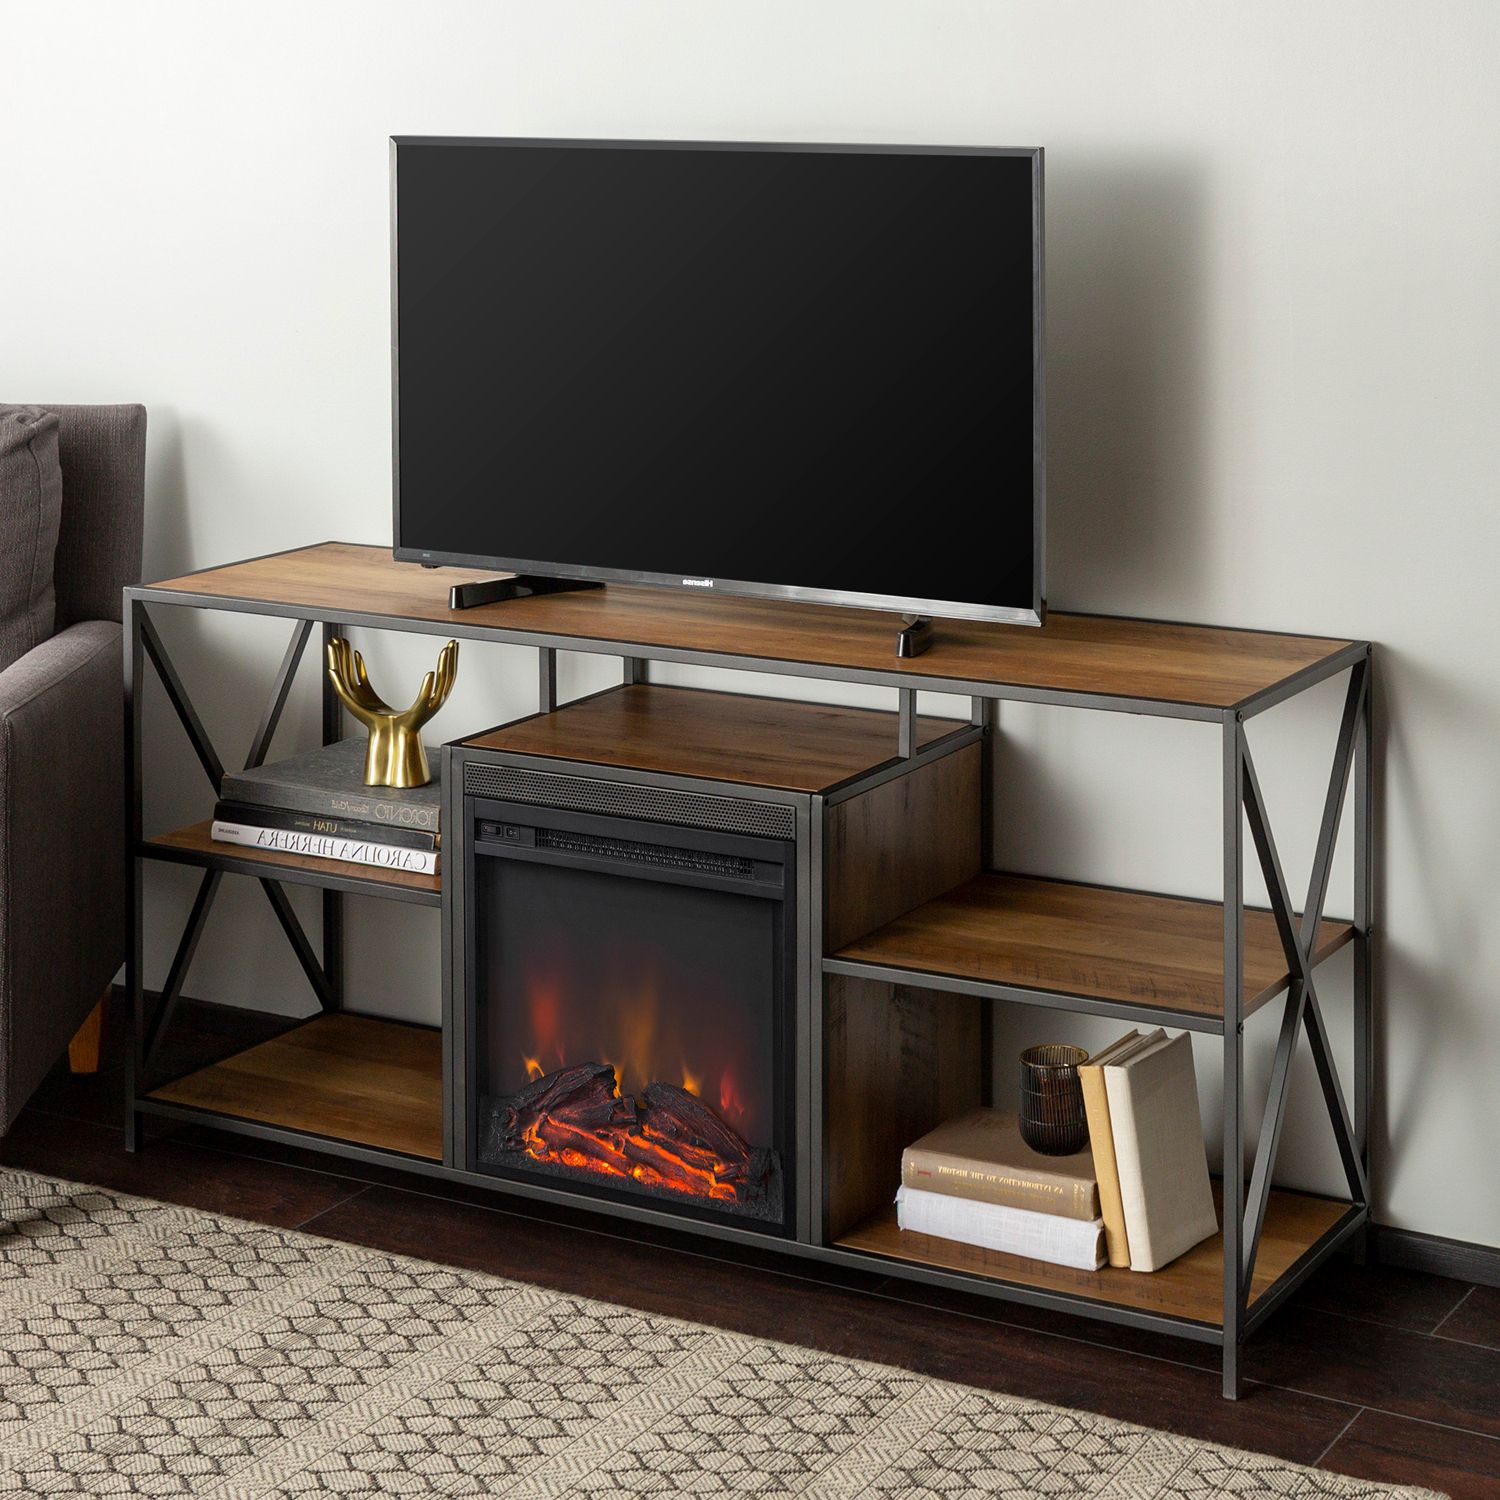 Rustic Oak Tv Stand With Fireplace – Pier1 With Urban Rustic Tv Stands (View 6 of 20)